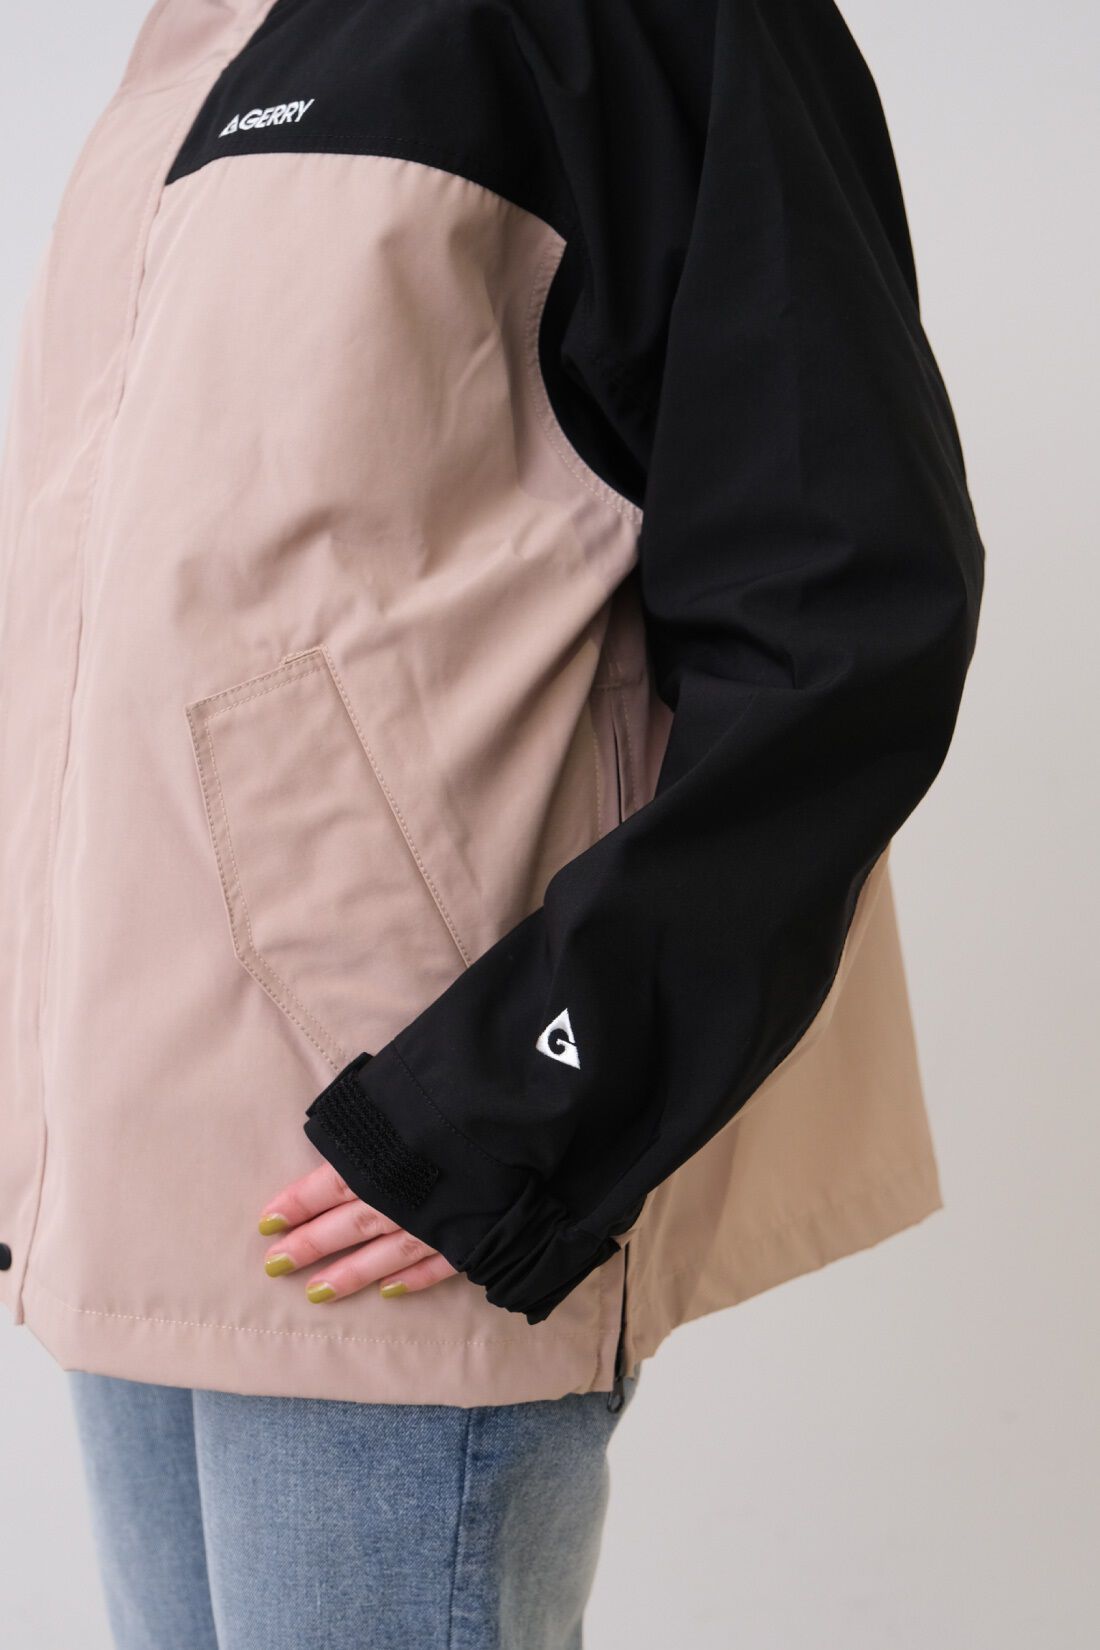 Real Stock|MEDE19F 〈SELECT〉　【GERRY】 4-WAY SHORT MOUNTAIN JACKET|2 beige